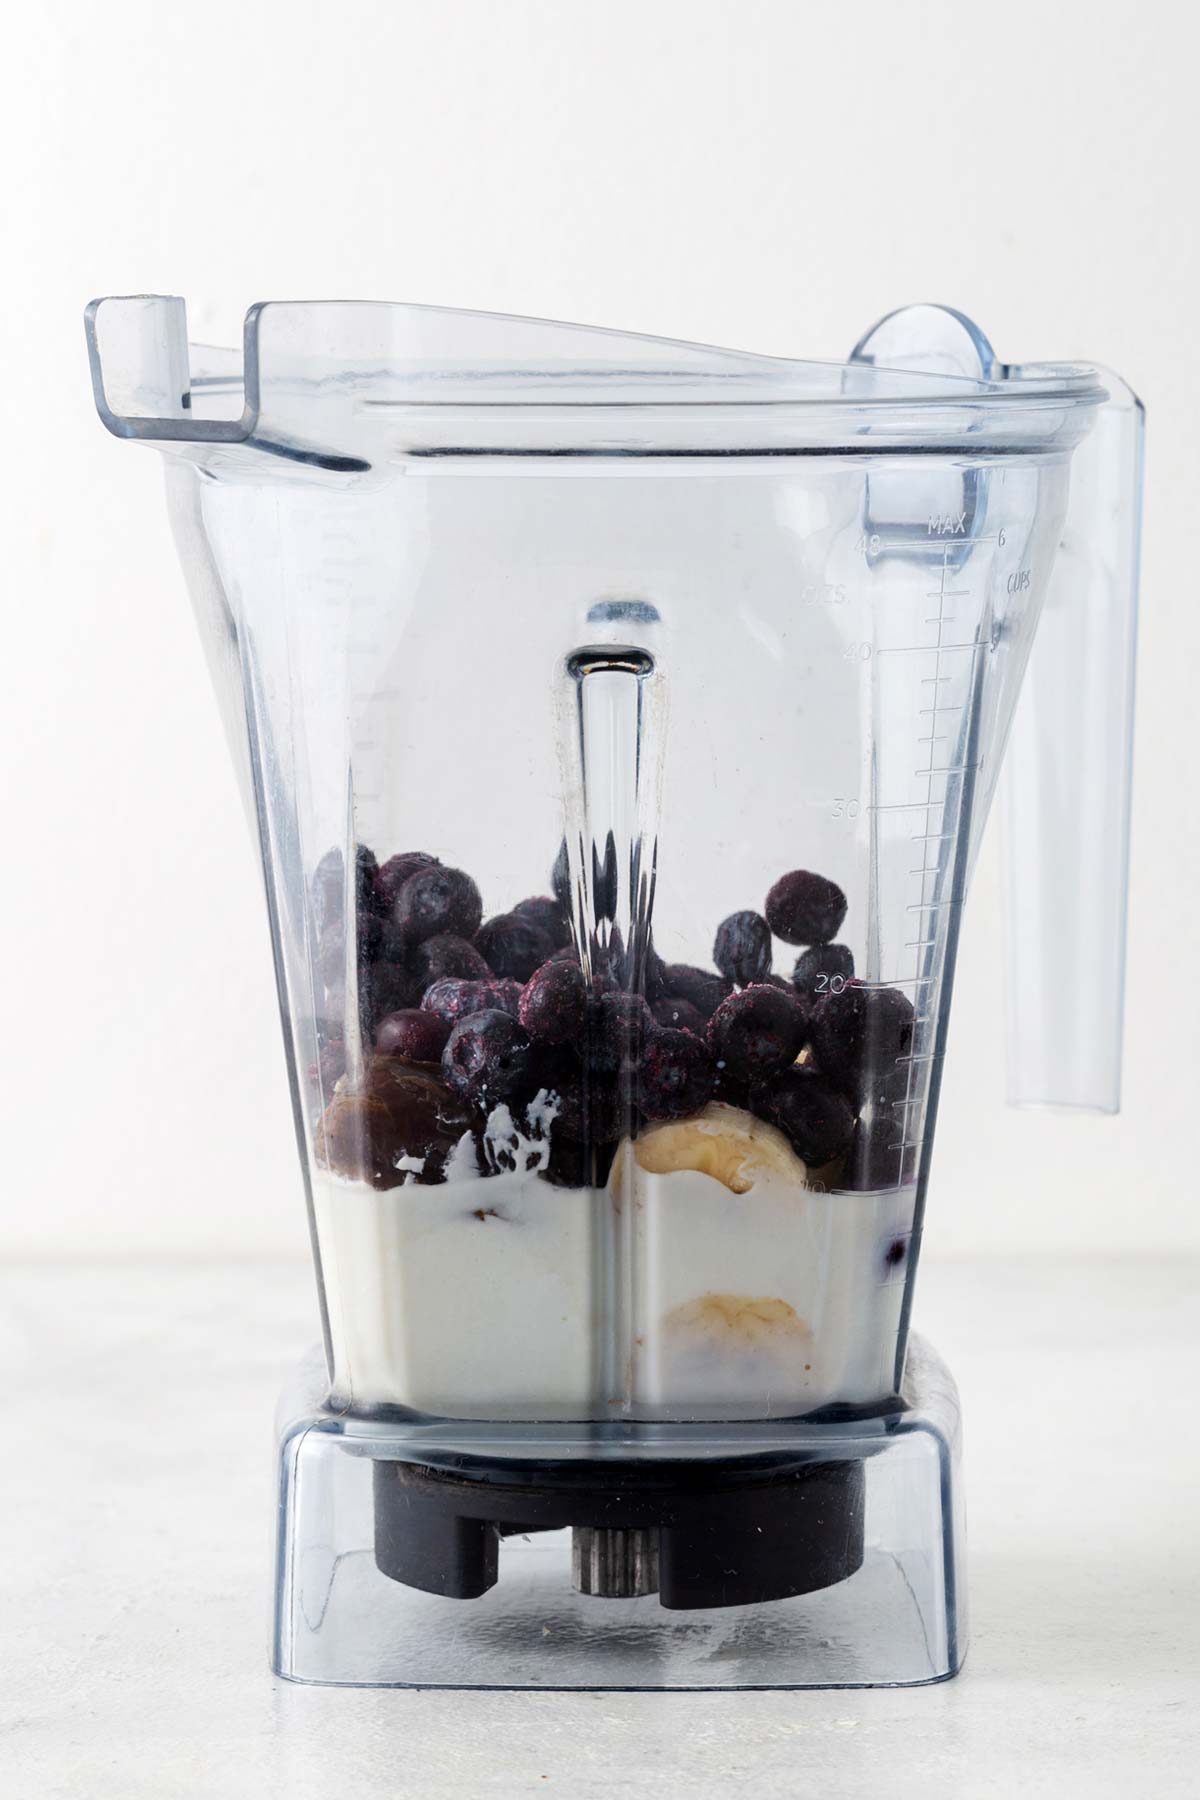 Blueberry banana smoothie ingredients in a blender.